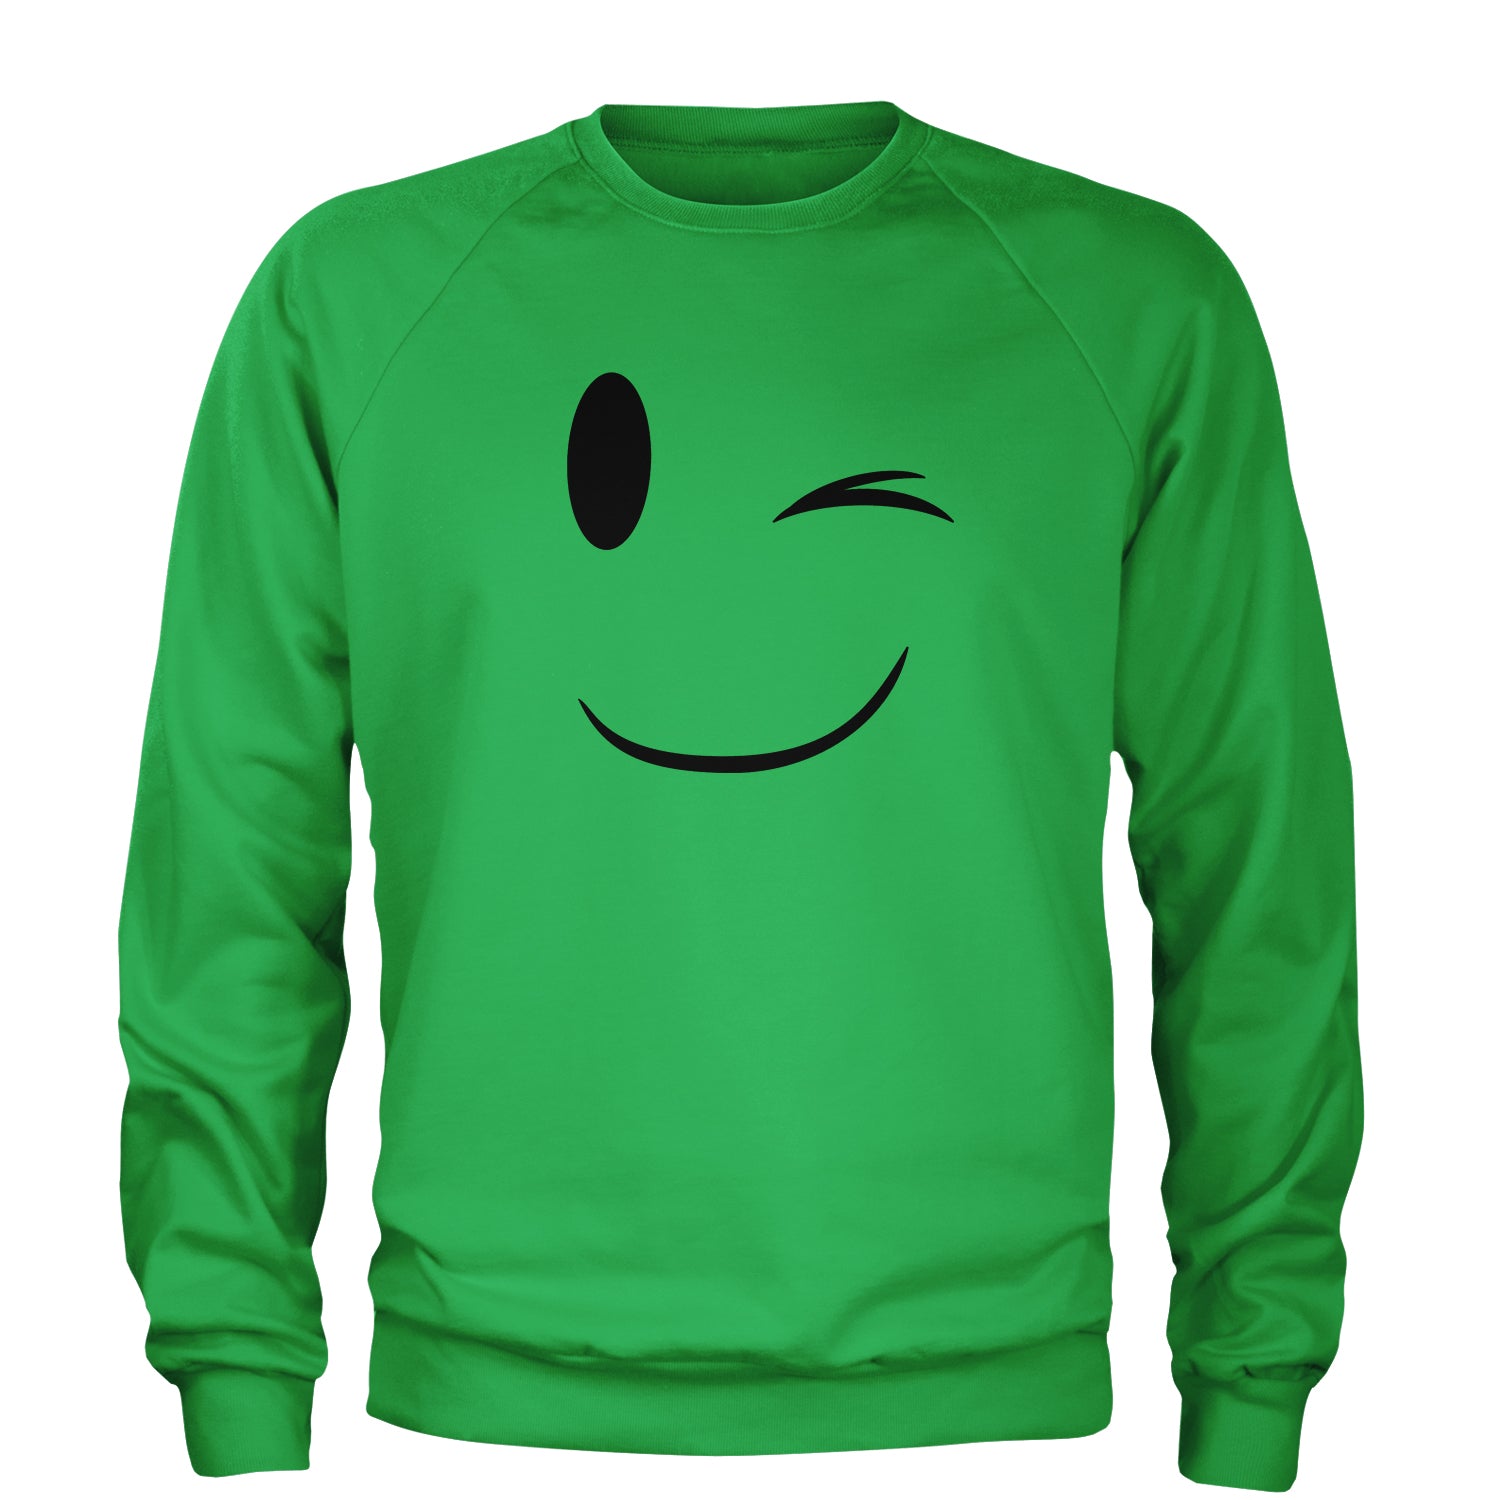 Emoticon Winking Smile Face Adult Crewneck Sweatshirt cosplay, costume, dress, emoji, emote, face, halloween, smiley, up, yellow by Expression Tees